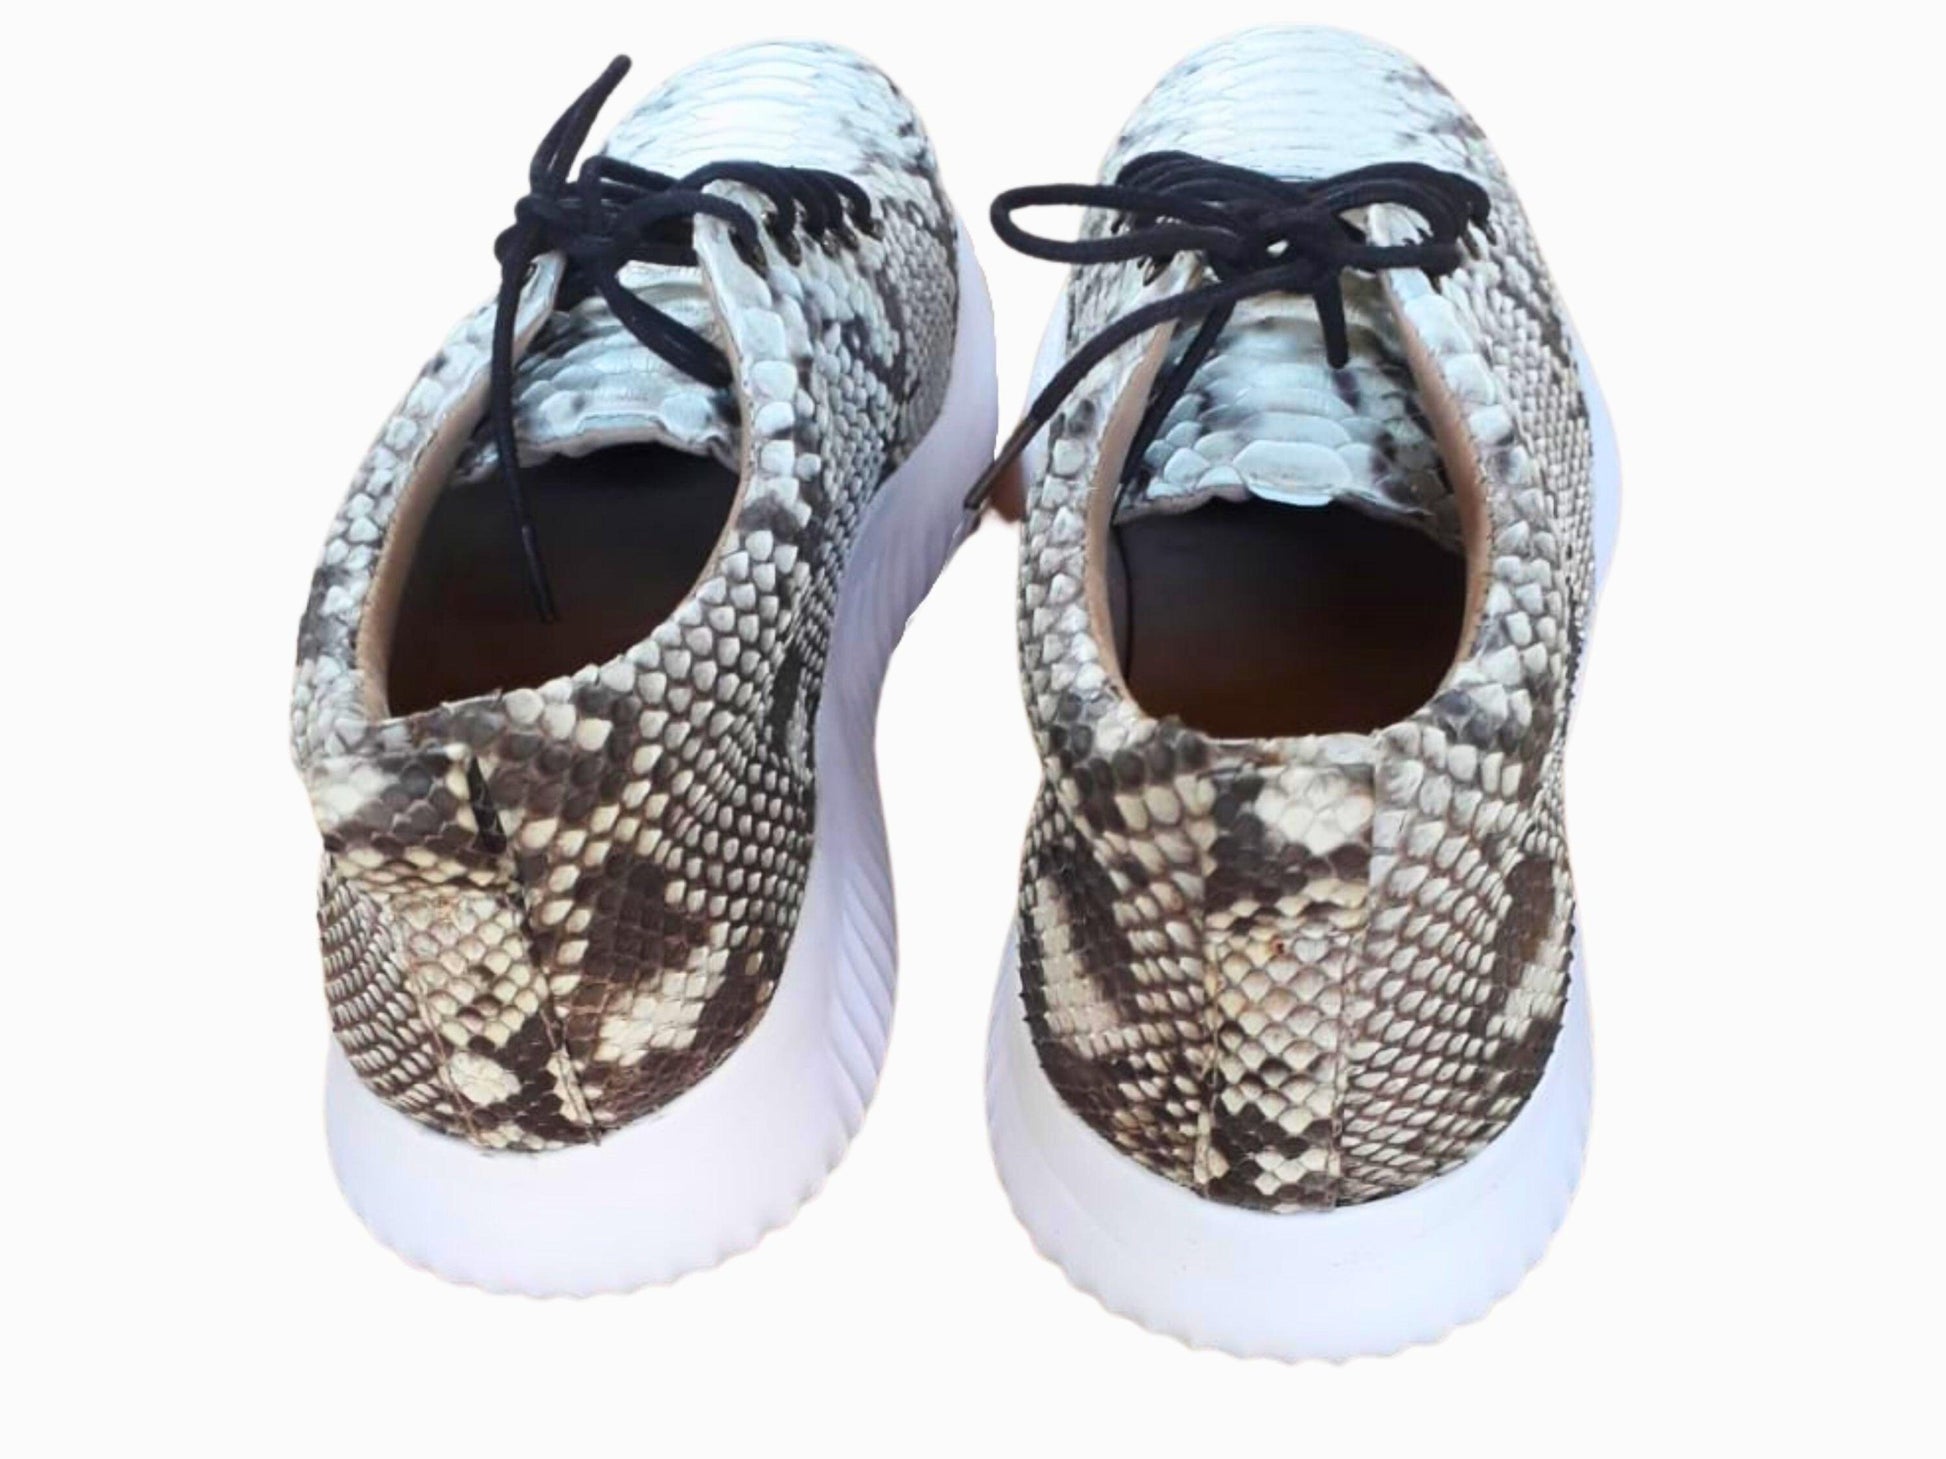 Shoes Snakeskin Lace-up Sneaker Shoes Python Jacket by LFM Fashion